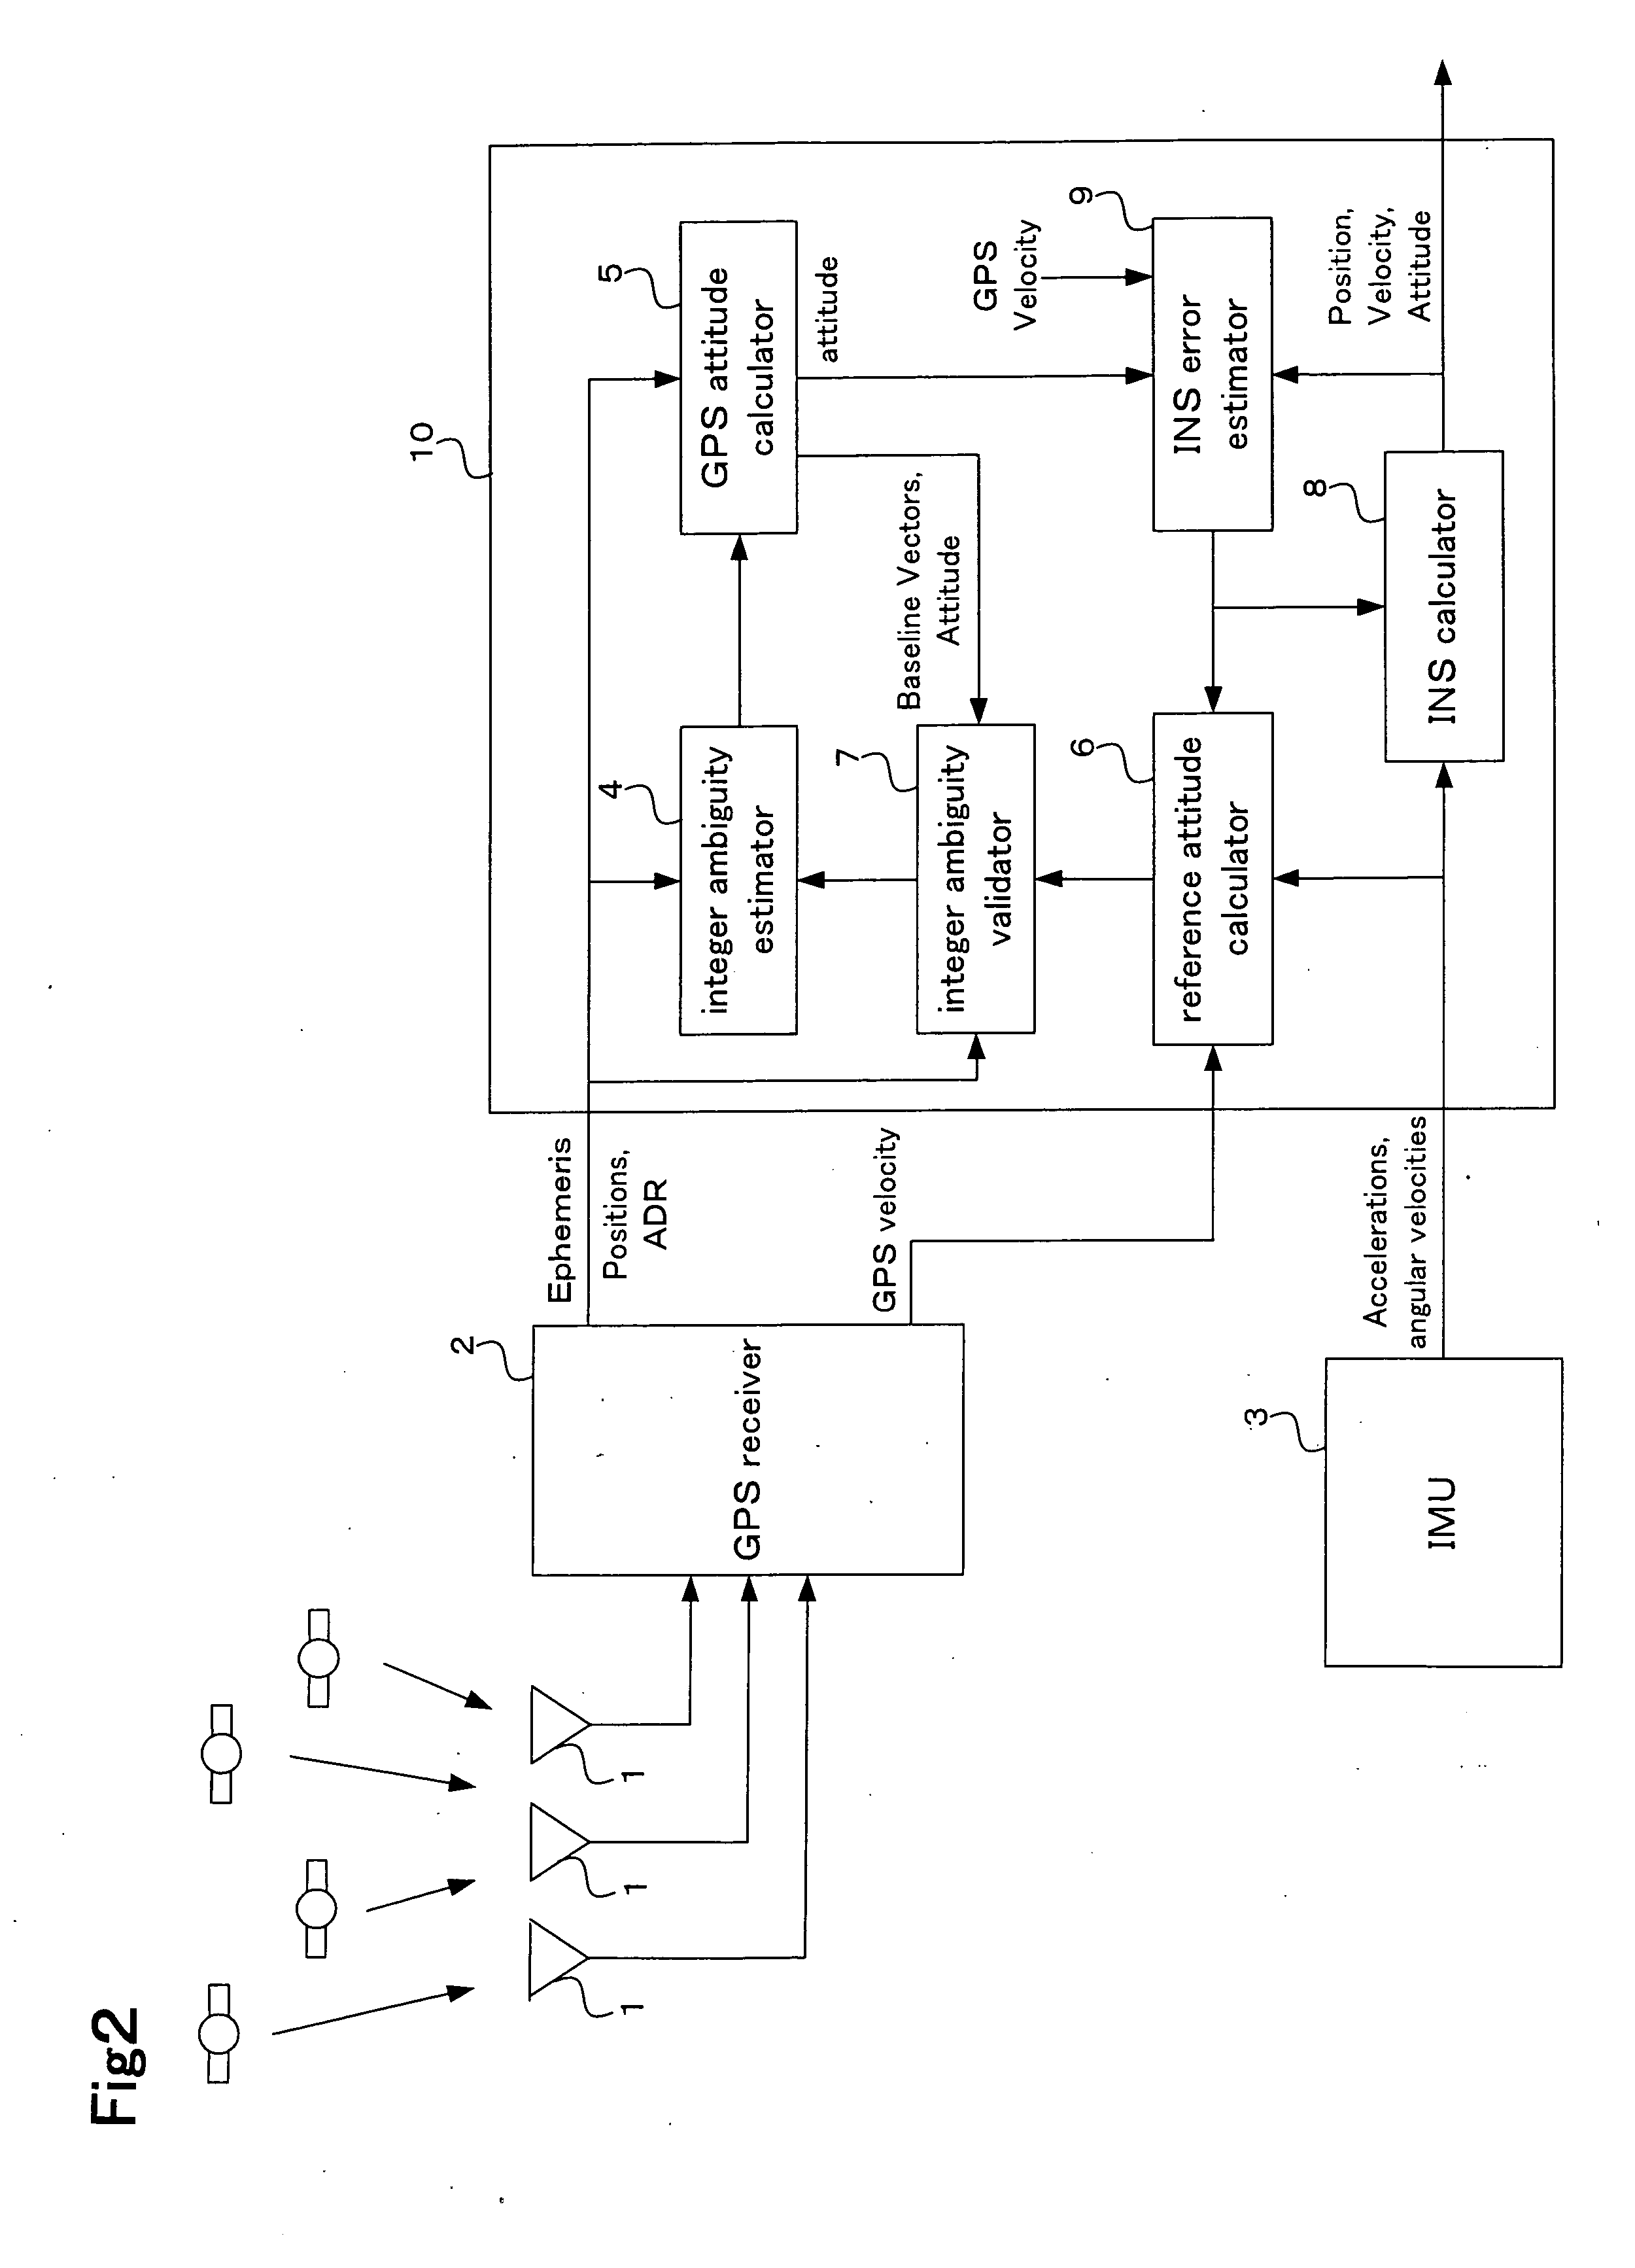 Apparatus and method for carrier phase-based relative positioning